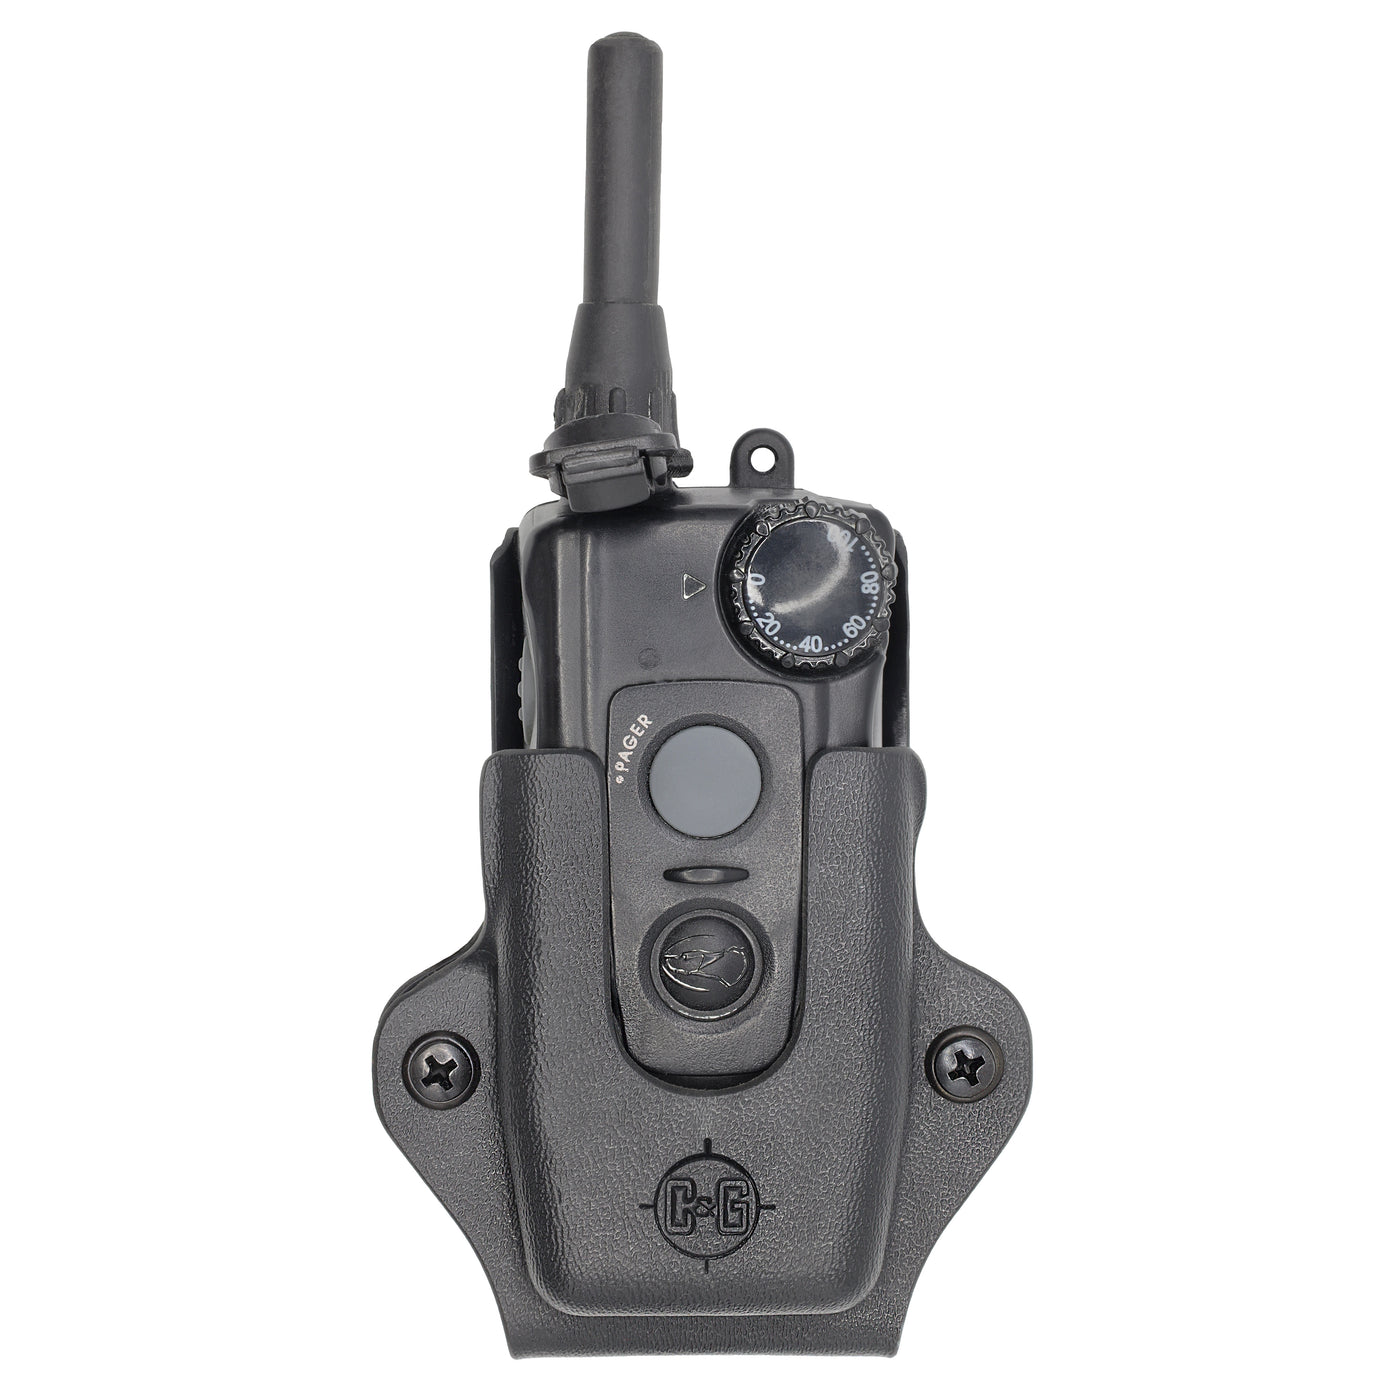 C&G Holsters SK-9 OWB E-Collar Remote Holder Dogtra Series